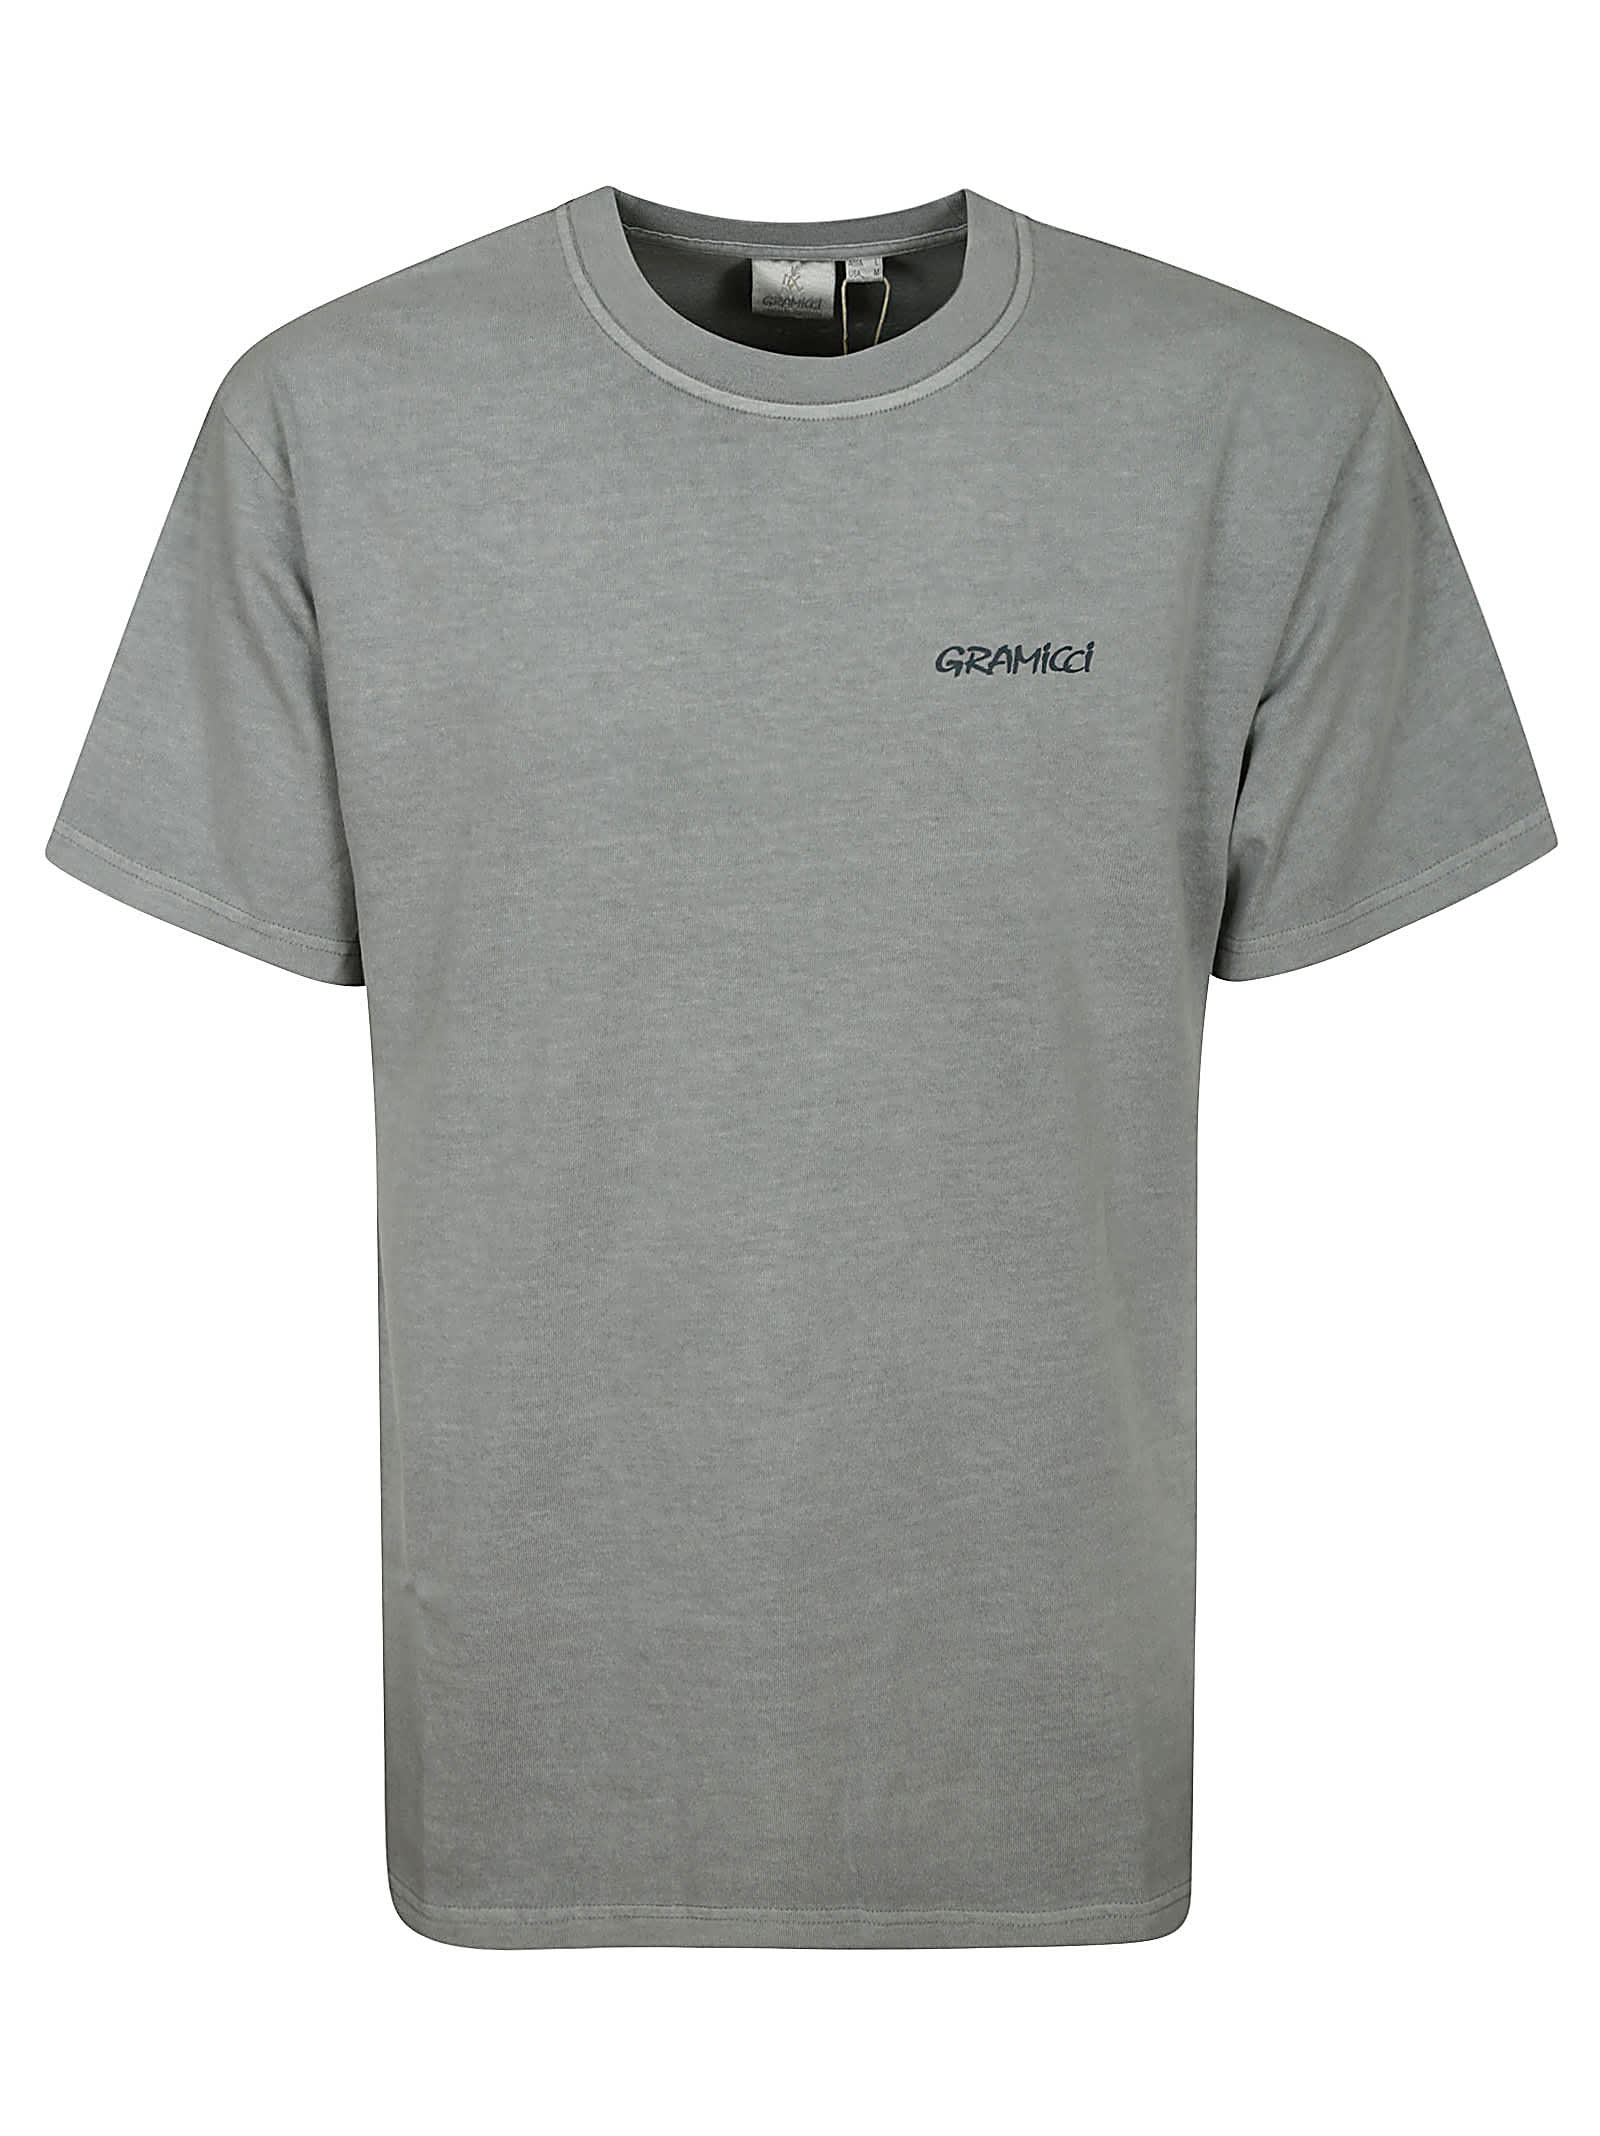 Gramicci G-short Tee In Smoky Slate Pigment